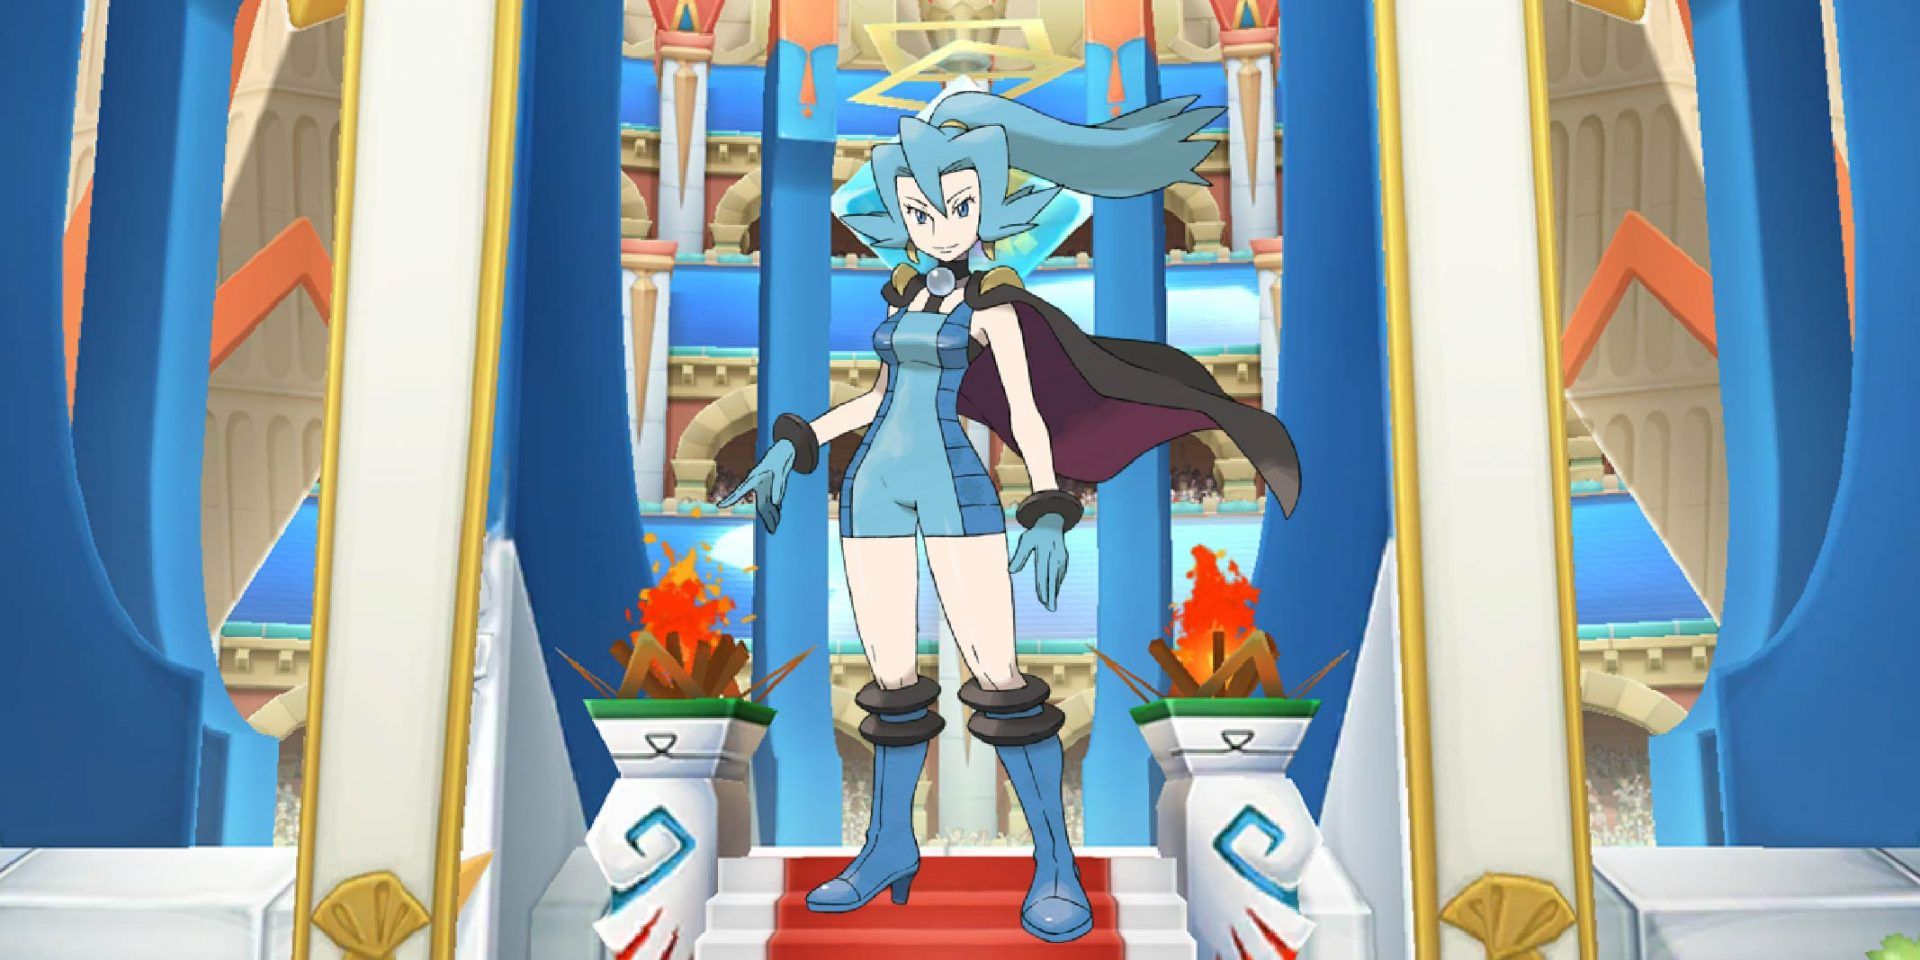 Clair from Pokémon standing against an arena backdrop.